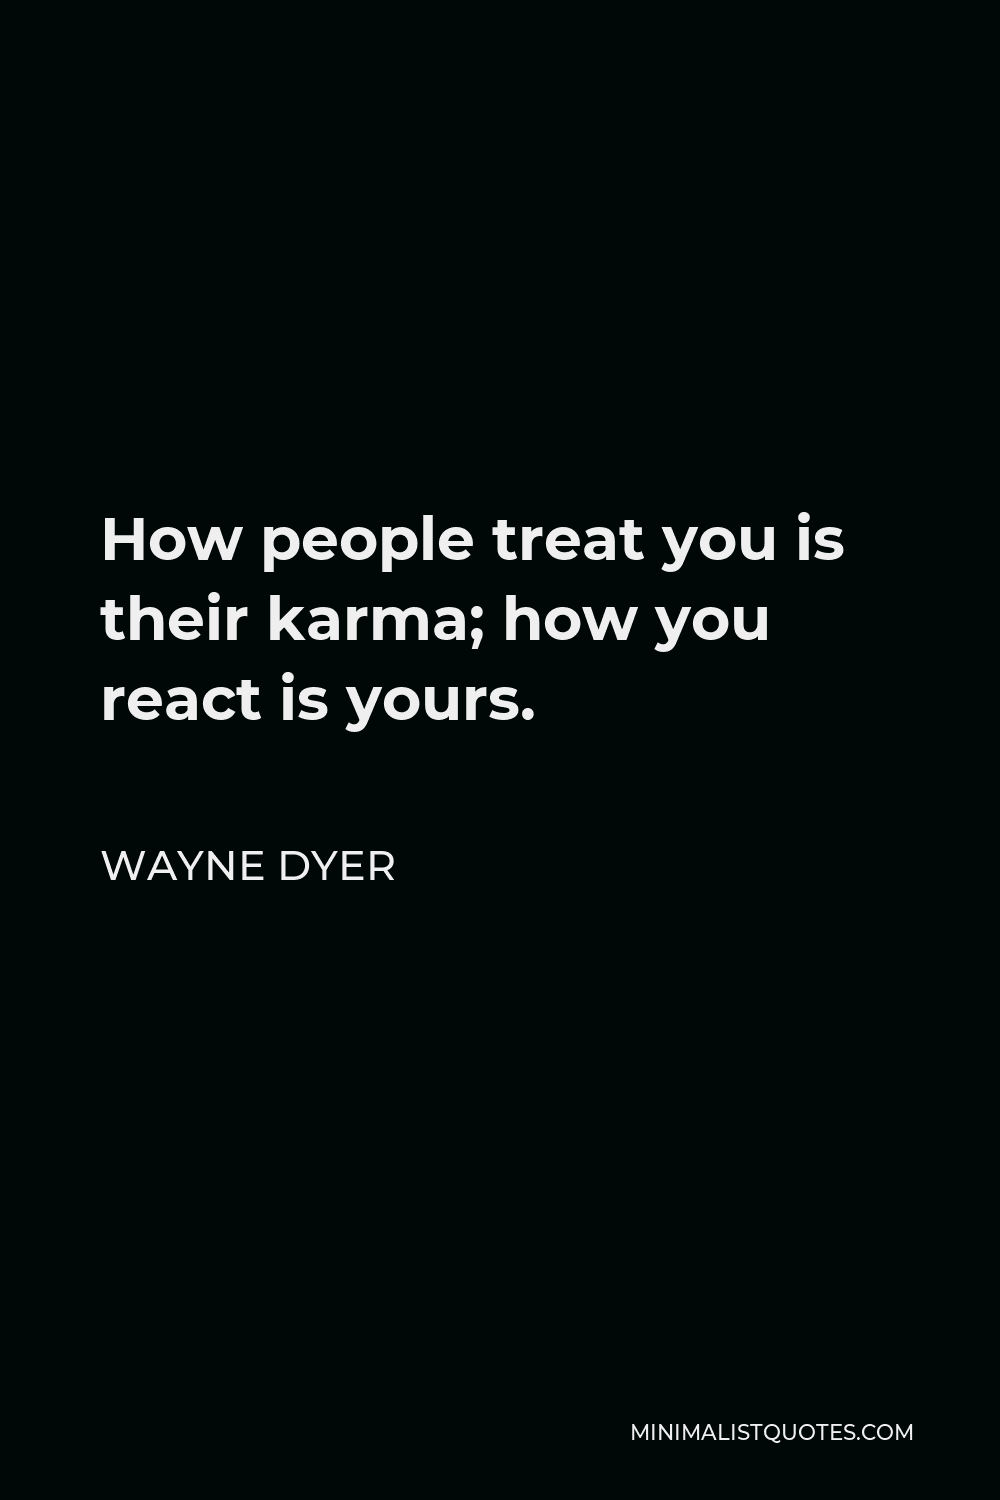 Wayne Dyer Quote: Your reputation is in the hands of others. That's ...